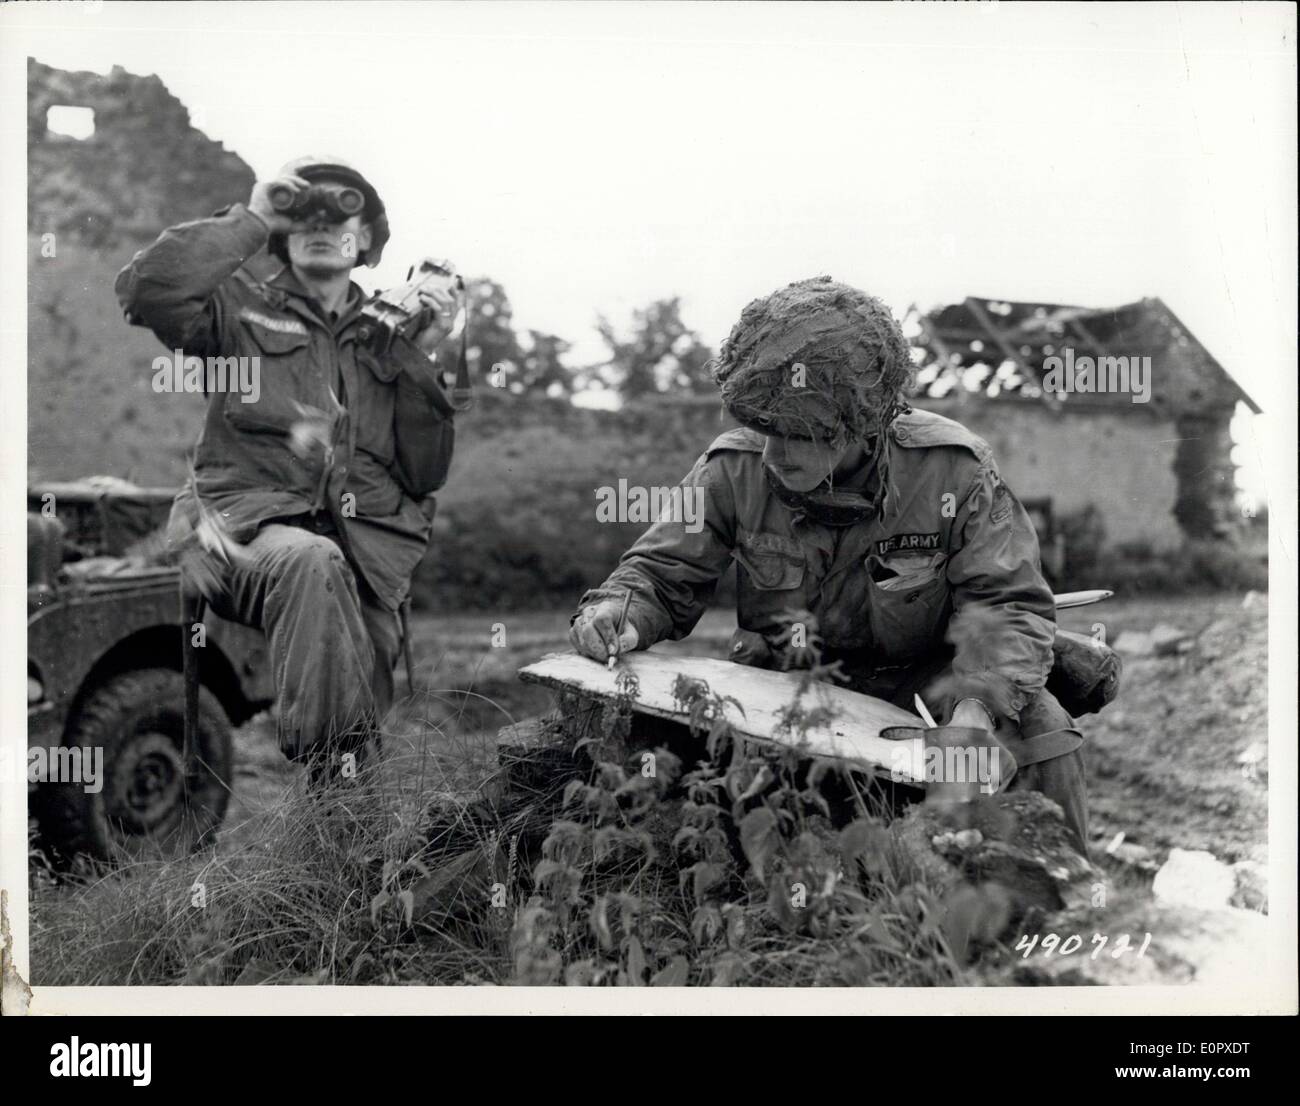 Apr. 05, 1957 - A lock at West Germany:Members of an armored infantry battalion observe mortar fire during a training exercise at Baumholder, Germany. Stock Photo